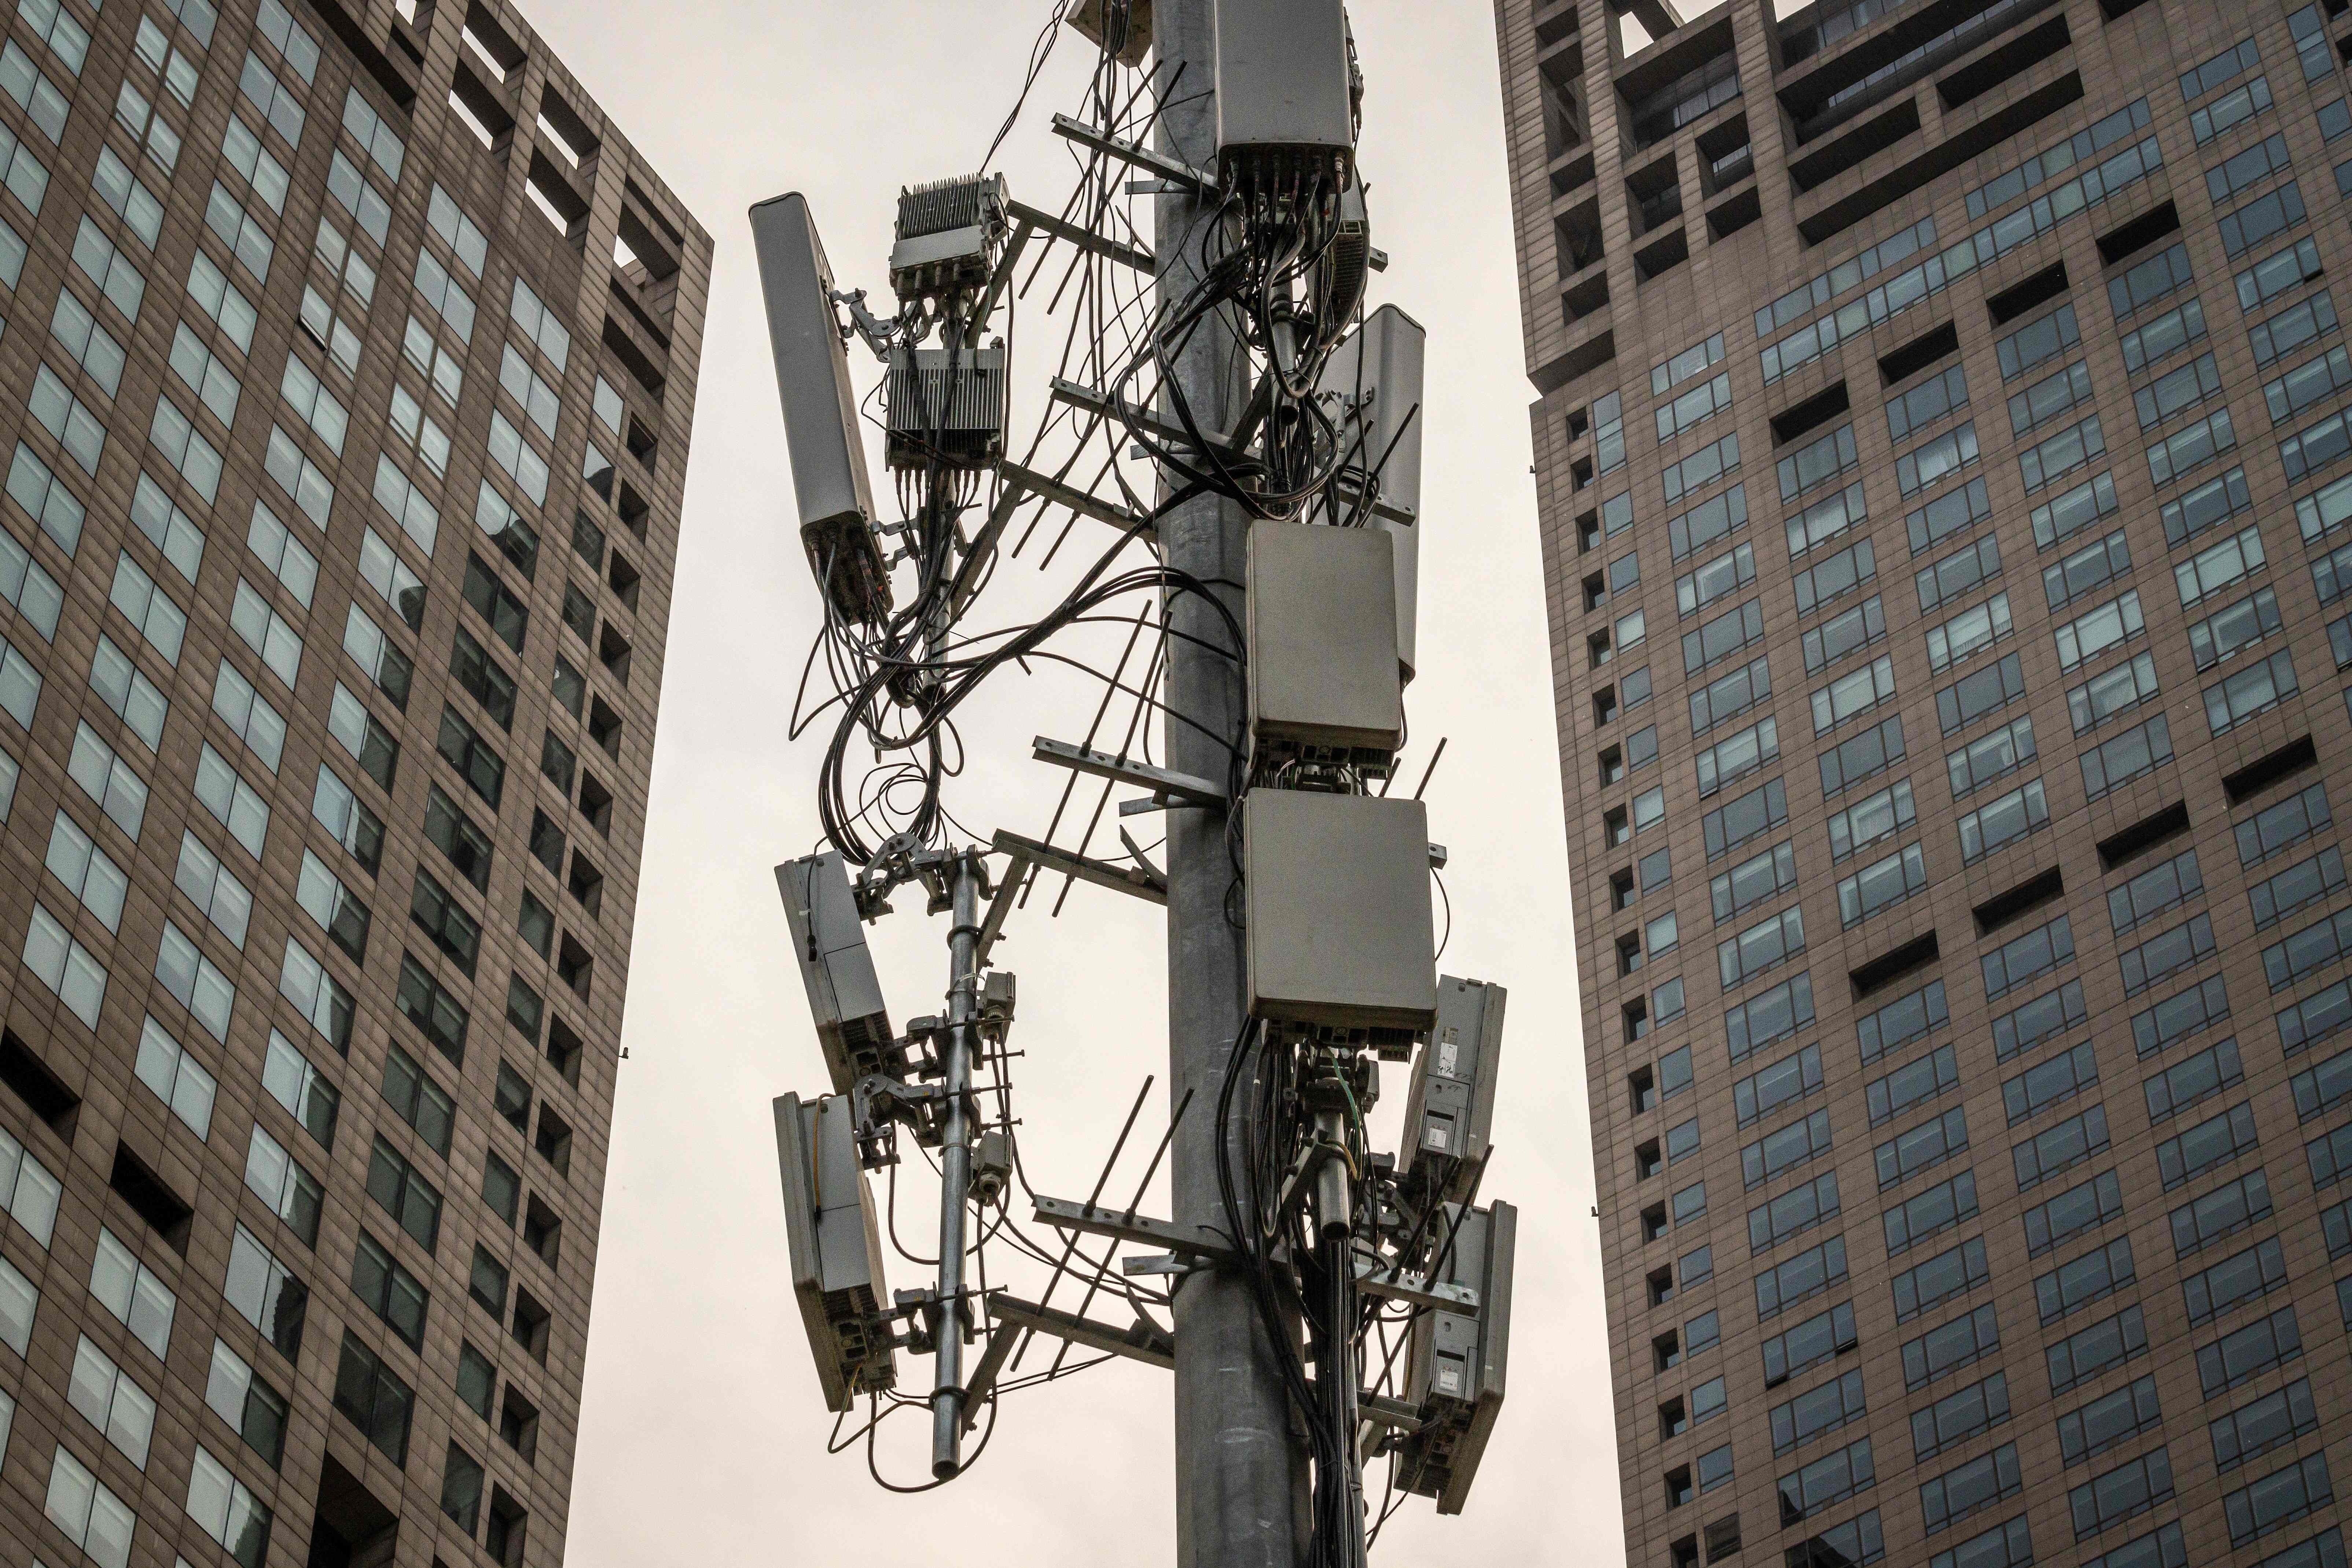 A 5G cellphone tower is seen on a street in Beijing on April 7, 2020. Huawei and ZTE won the right to build the vast majority of new 5G towers for China Mobile and China Broadcasting Network, 400,000 of which will be built this year. Photo: AFP